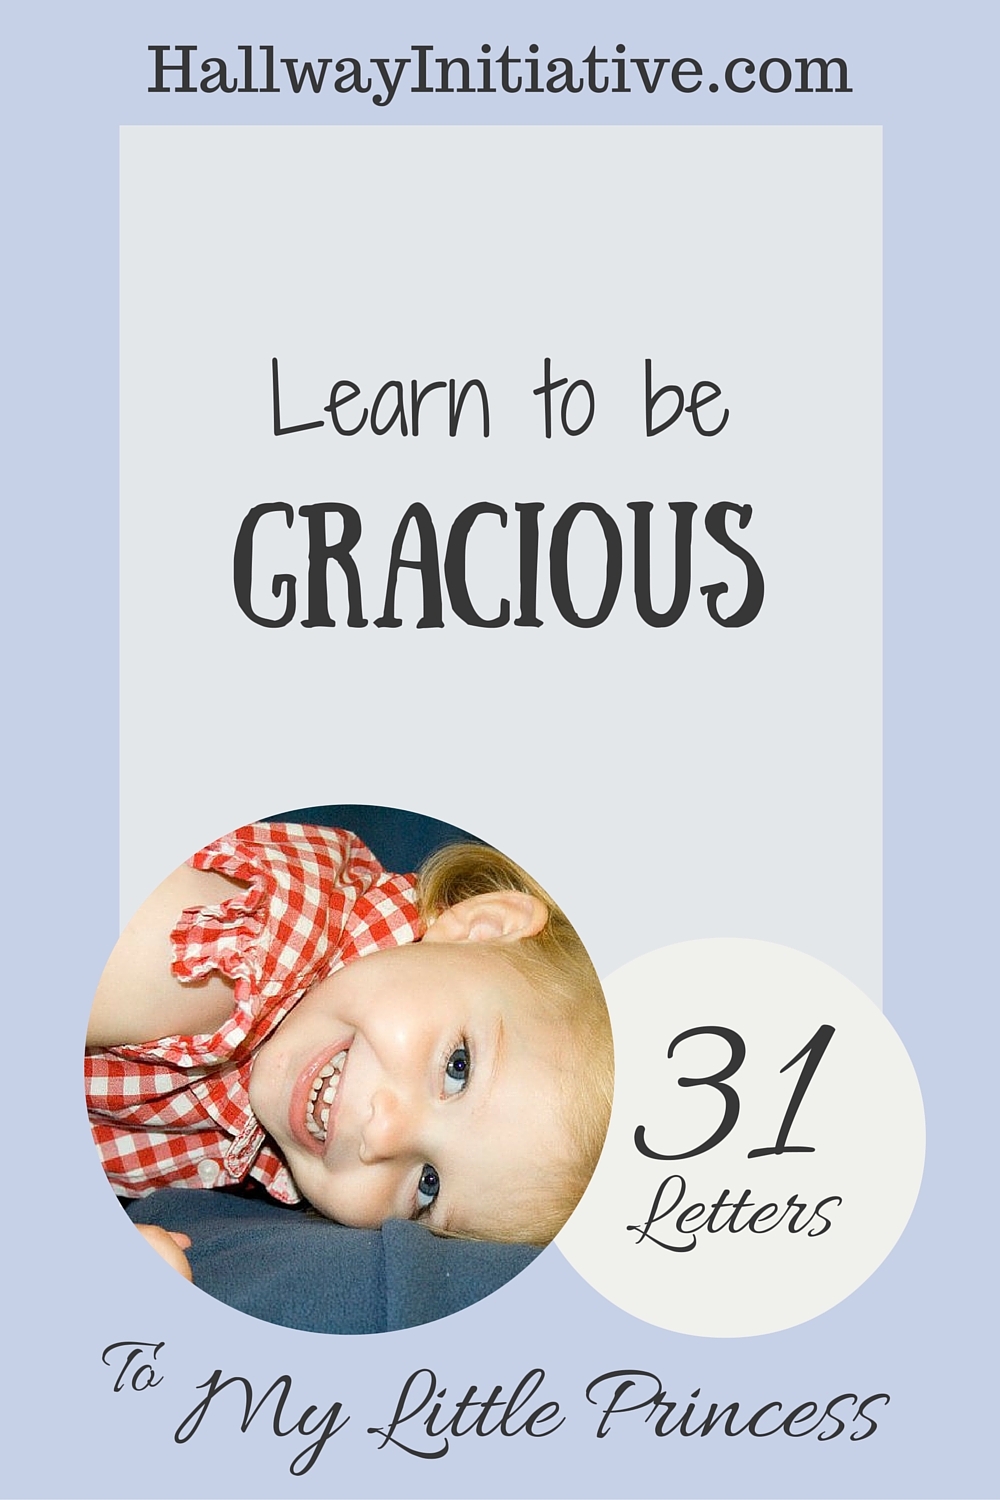 Learn to be gracious